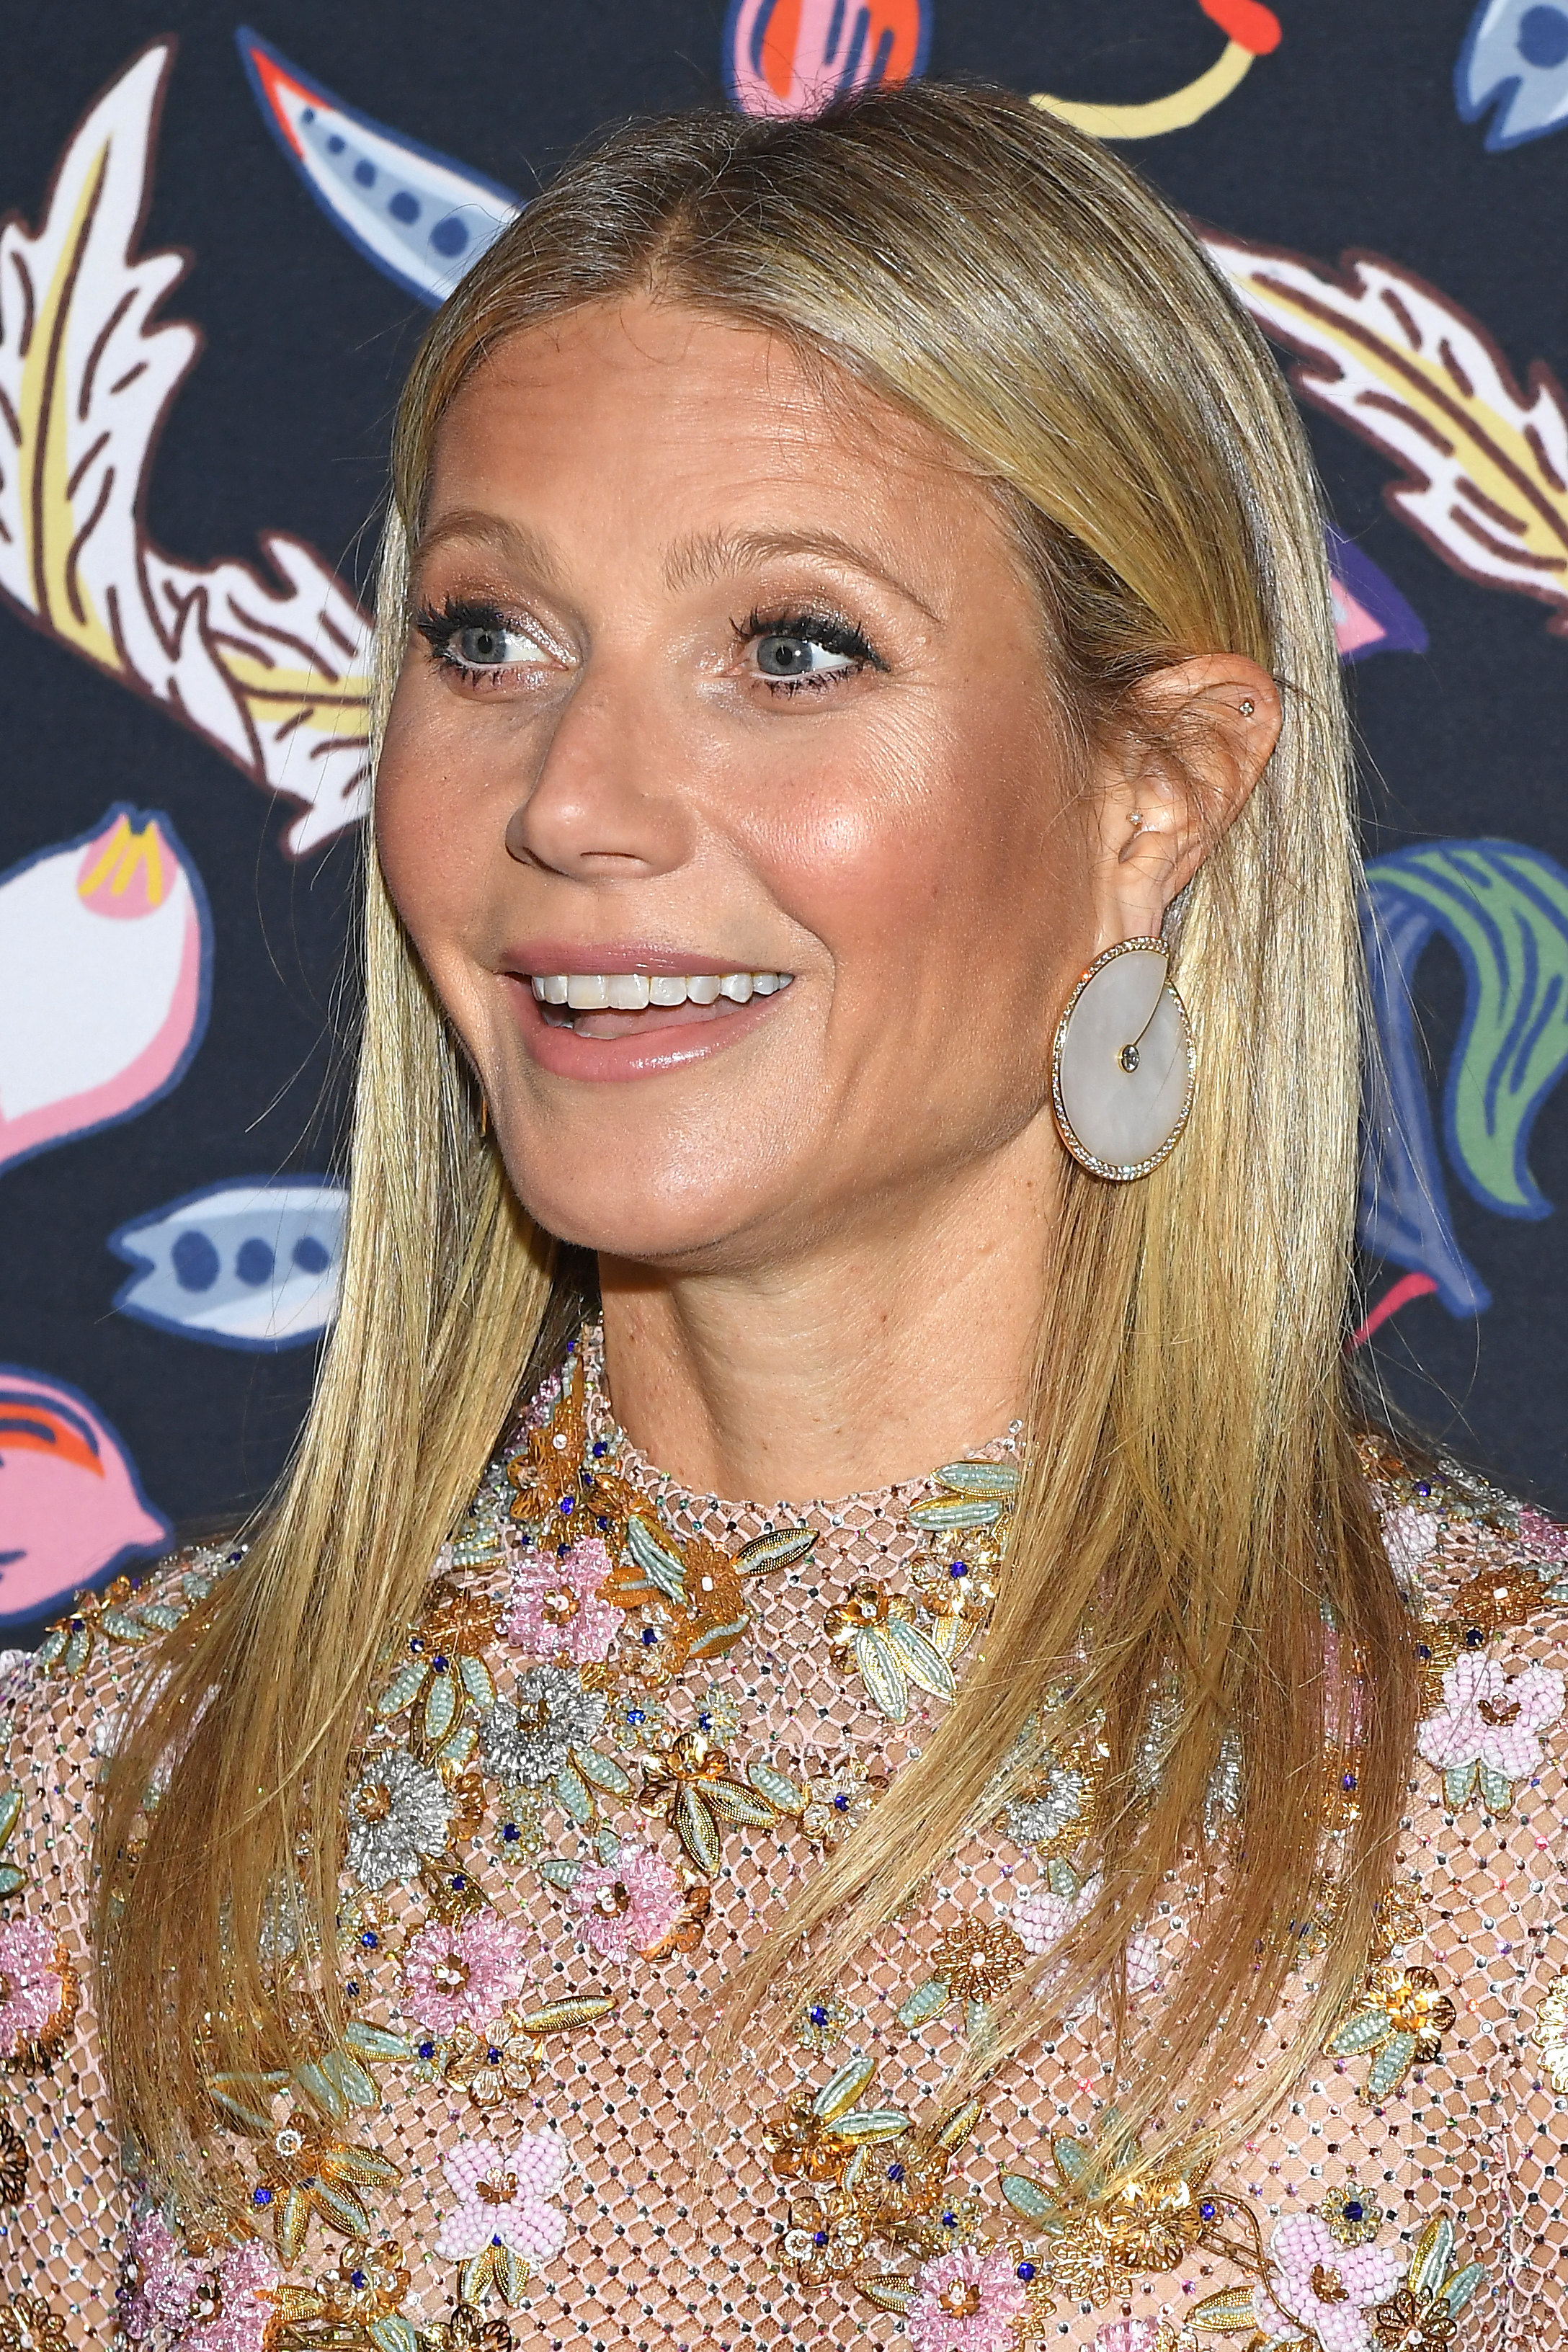 Close-up of Gwyneth at a media event wearing a colorful mesh outfit